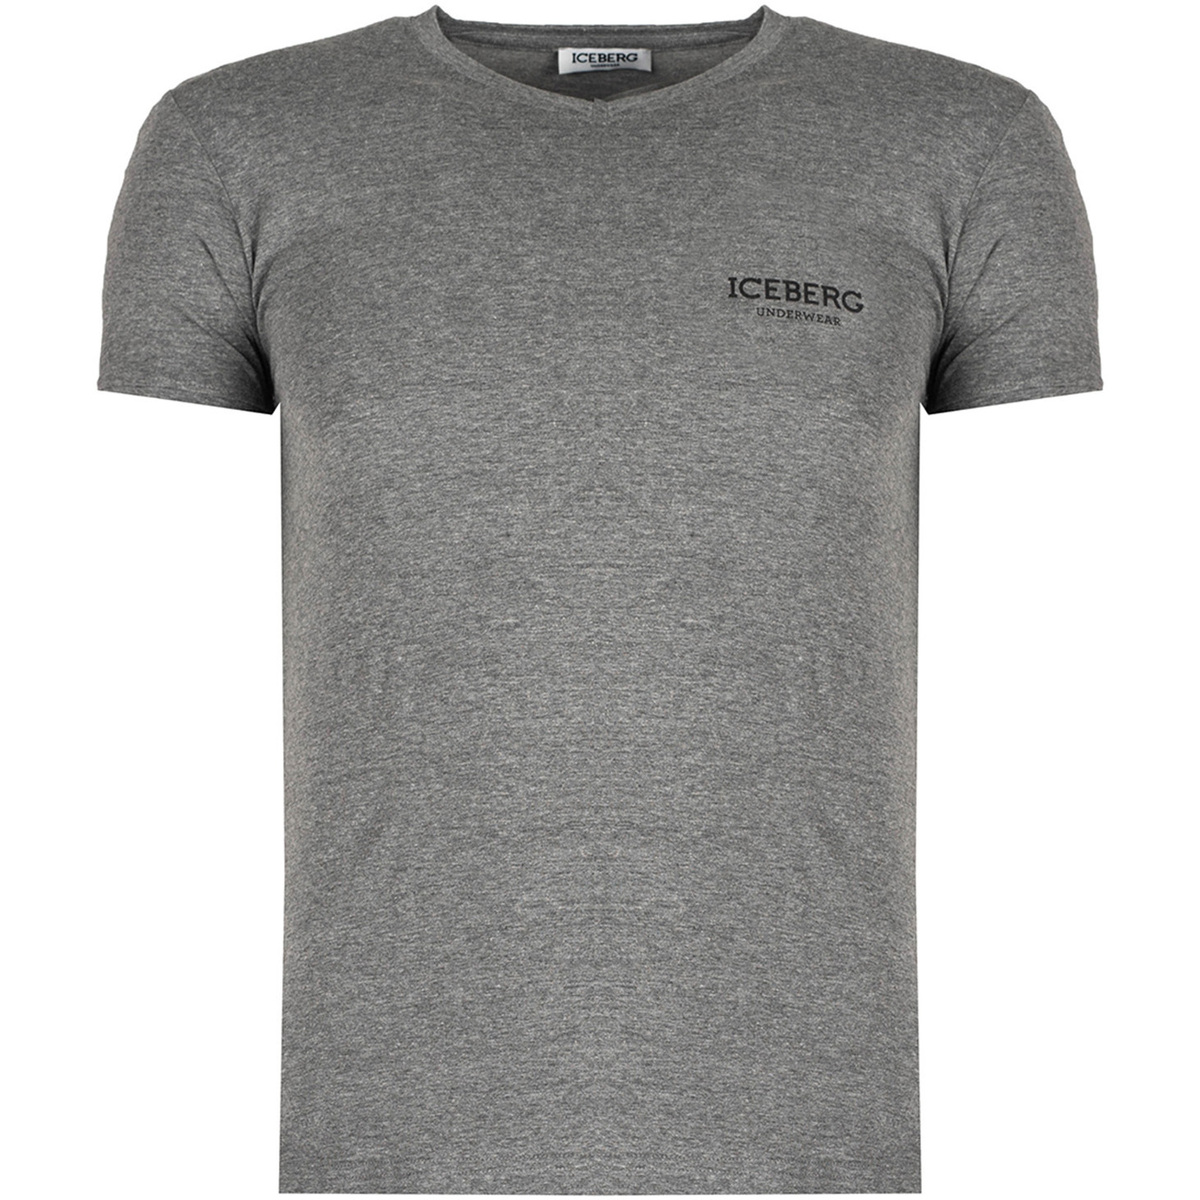 Vêtements Homme T-shirts Calee manches courtes Iceberg ICE1UTS02 Gris